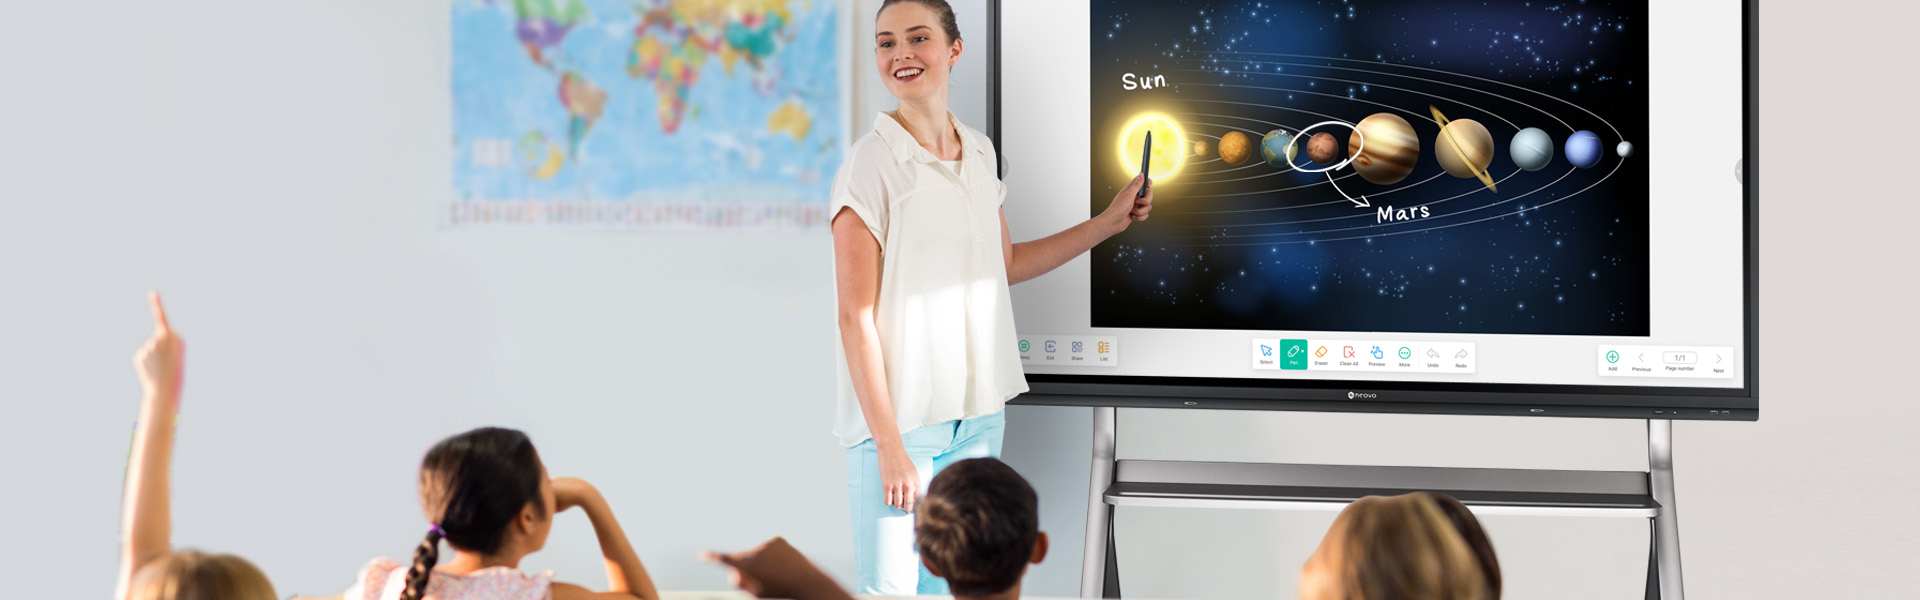 See our full line-up of Meetboard 3 interactive flat panel displays